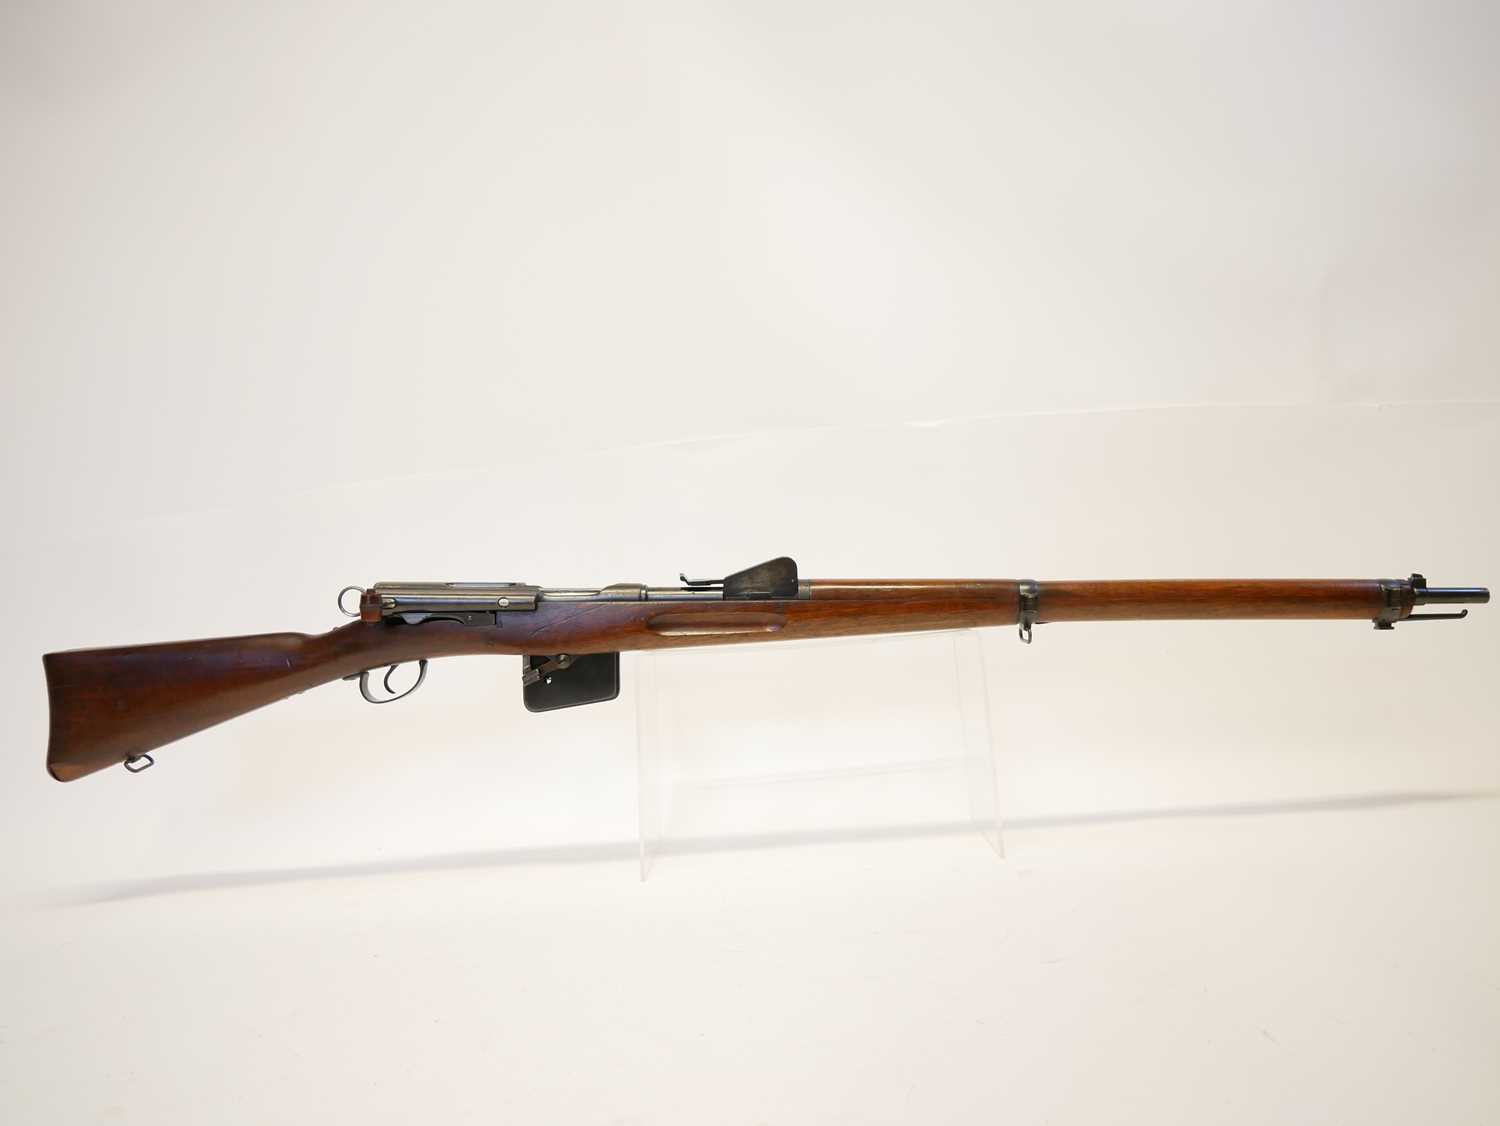 Schmidt Rubin 1889 7.5x 53.5mm straight pull rifle, matching serial numbers 119667, with 30" barrel, - Image 2 of 20